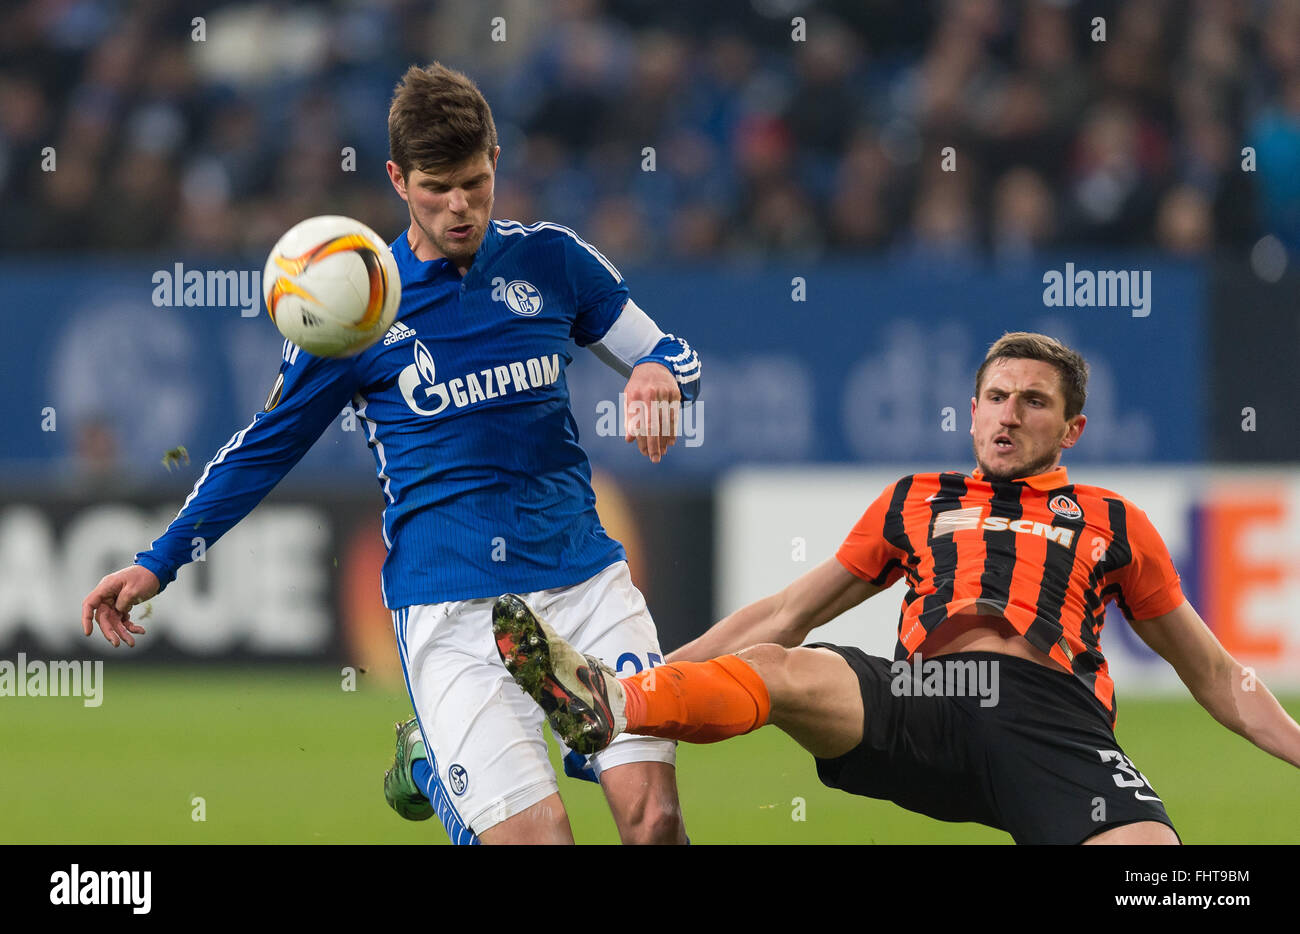 Gelsenkirchen, Germany. 25th Feb, 2016. Schalke's Klaas-Jan Huntelaar (L) and Donetsk's Serhiy Kryvtsov (R) vie for the ball during the Europa League Round of 32 Second Leg soccer match between FC Schalke 04 and FC Shakhtar Donetsk in the Veltins Arena in Gelsenkirchen, Germany, 25 February 2016. PHOTO: GUIDO KIRCHNER/dpa/Alamy Live News Stock Photo